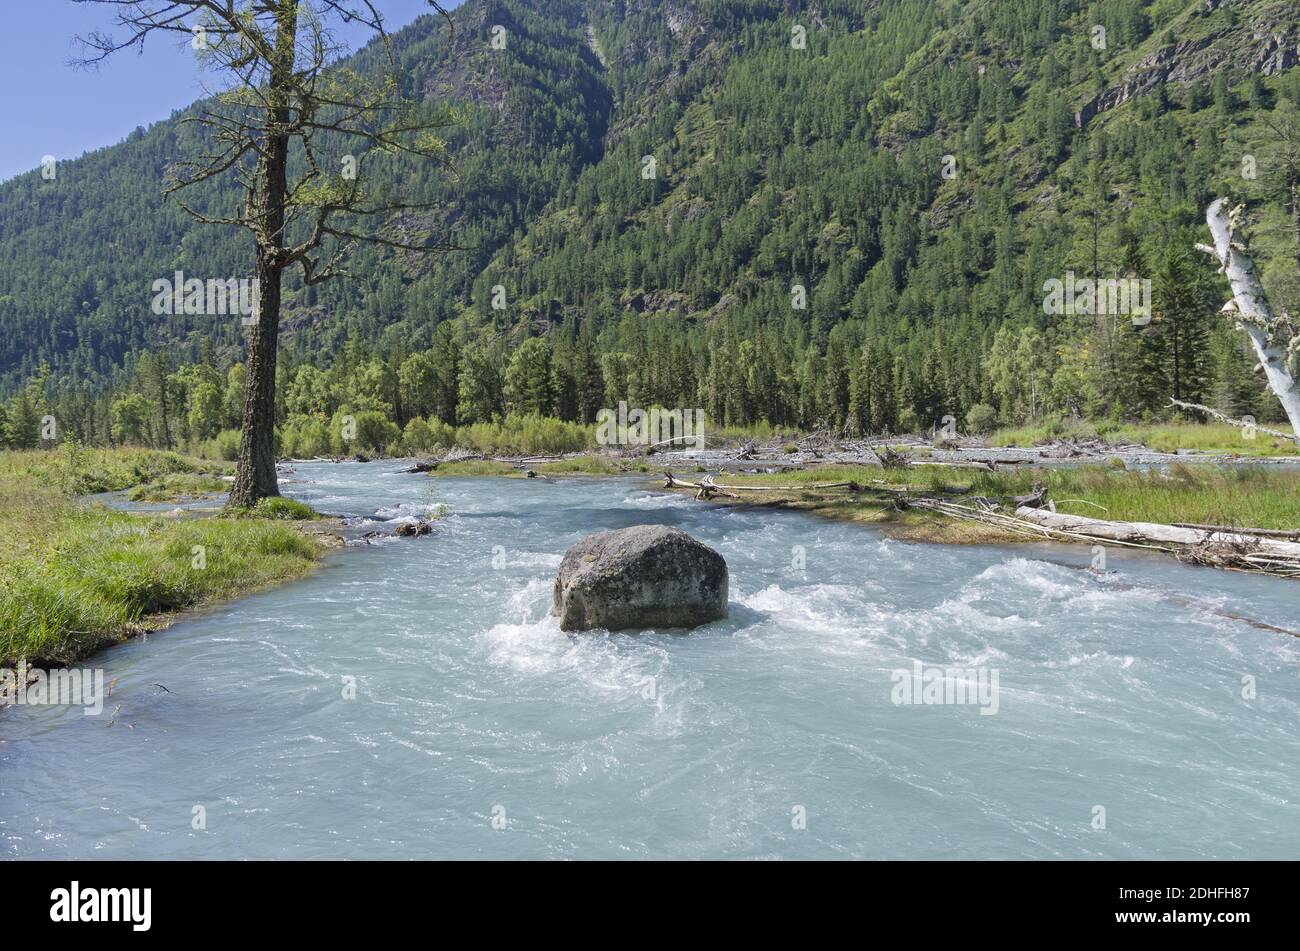 Big rock in the middle of a mountain river. Stock Photo